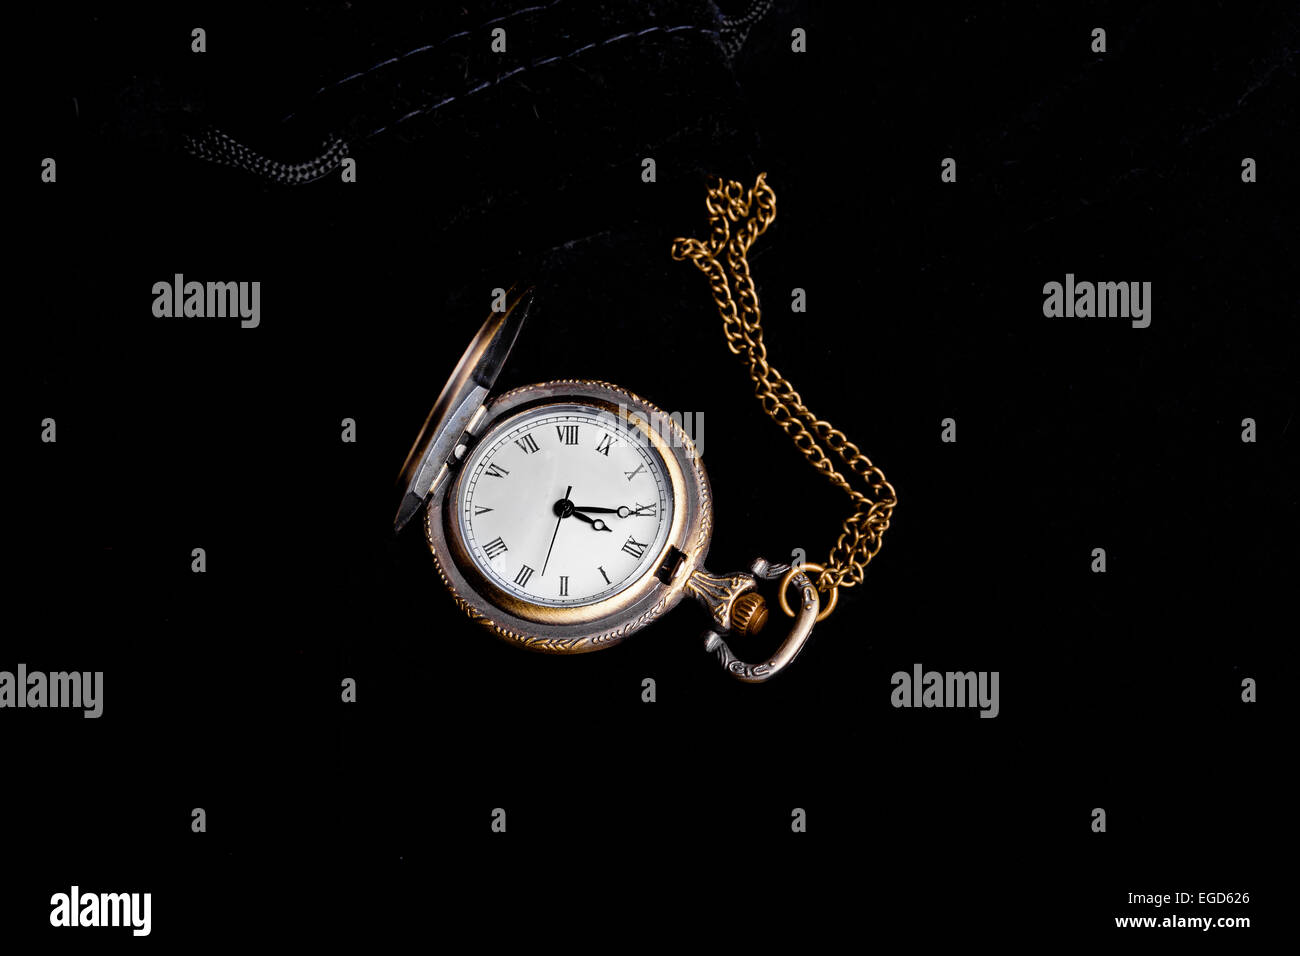 Vintage watch showing five minutes to twelve over black background Stock Photo